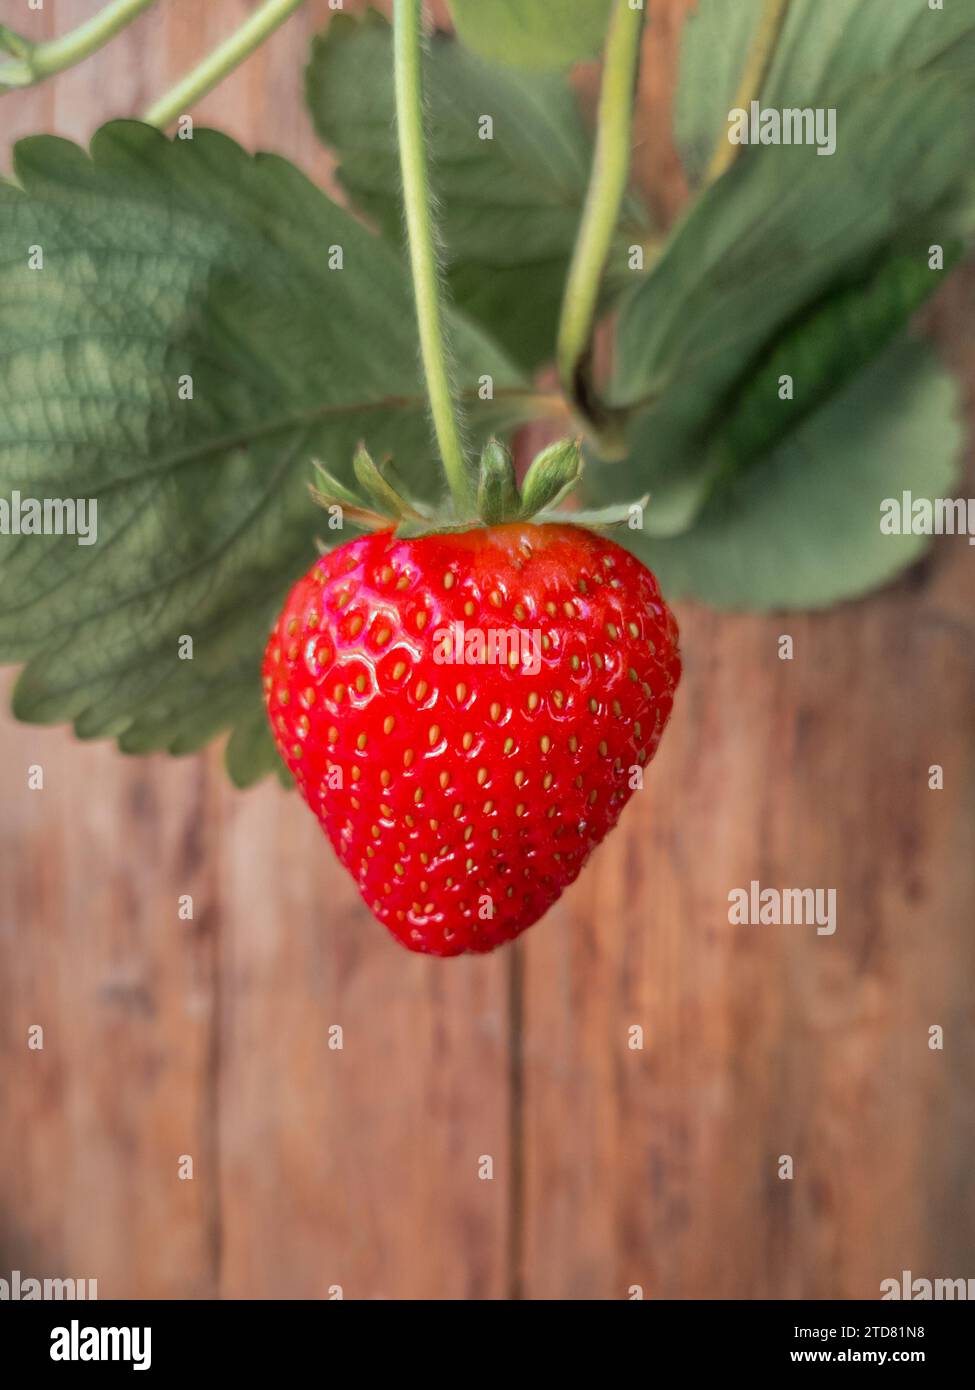 A succulent vibrant red strawberry hanging on a branch with green leaves on a rustic wooden background Stock Photo